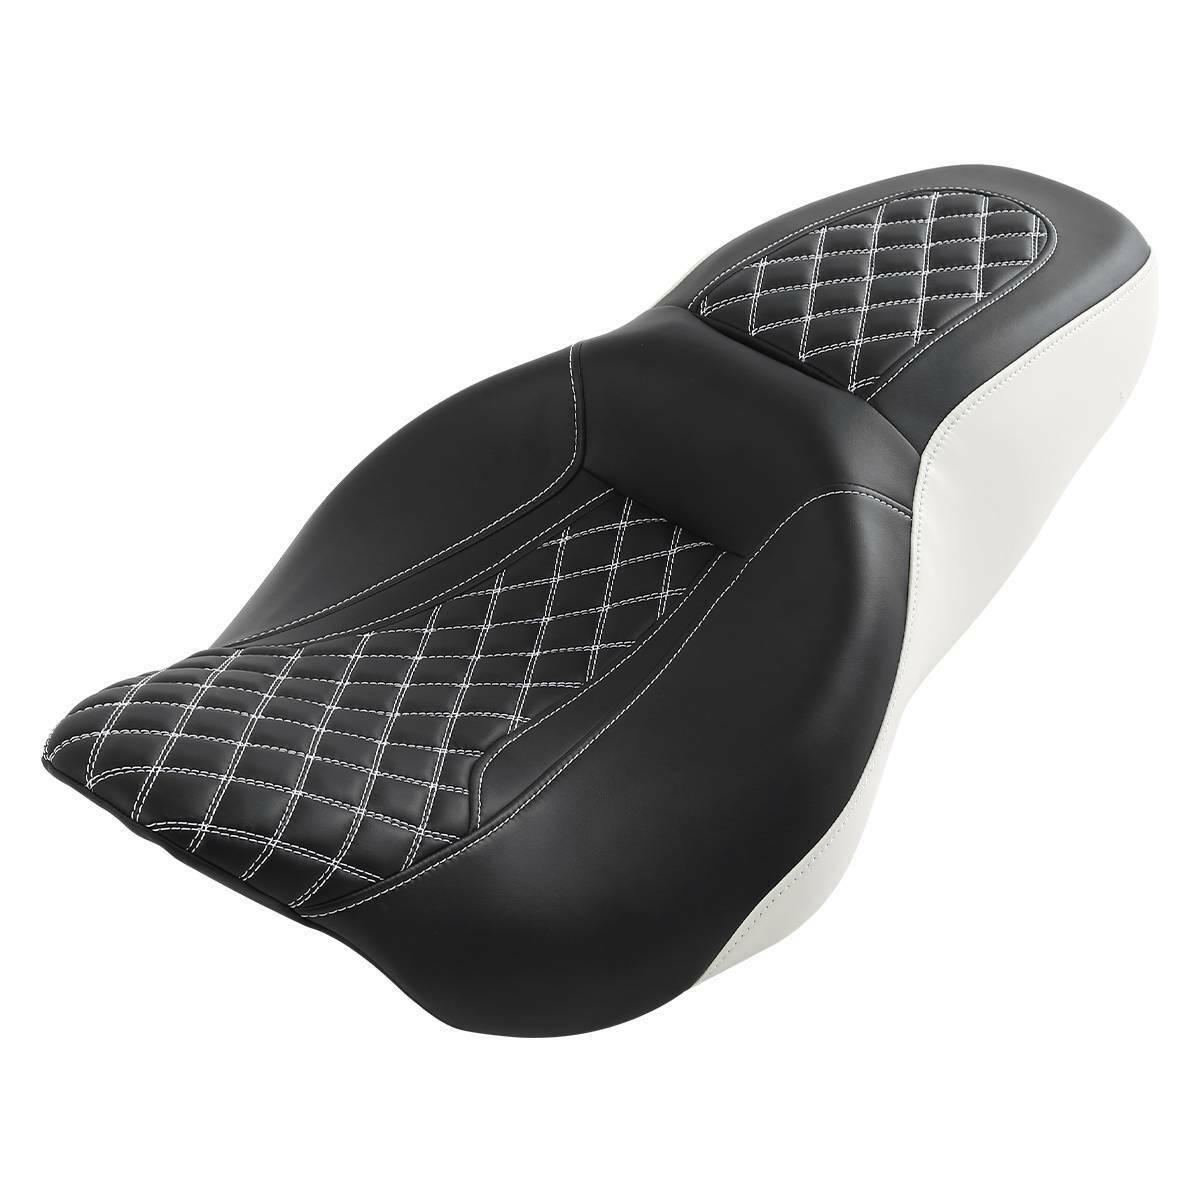 Black White Driver Passenger Seat Fit For Harley Touring Road King Glide 2009-Up - Moto Life Products